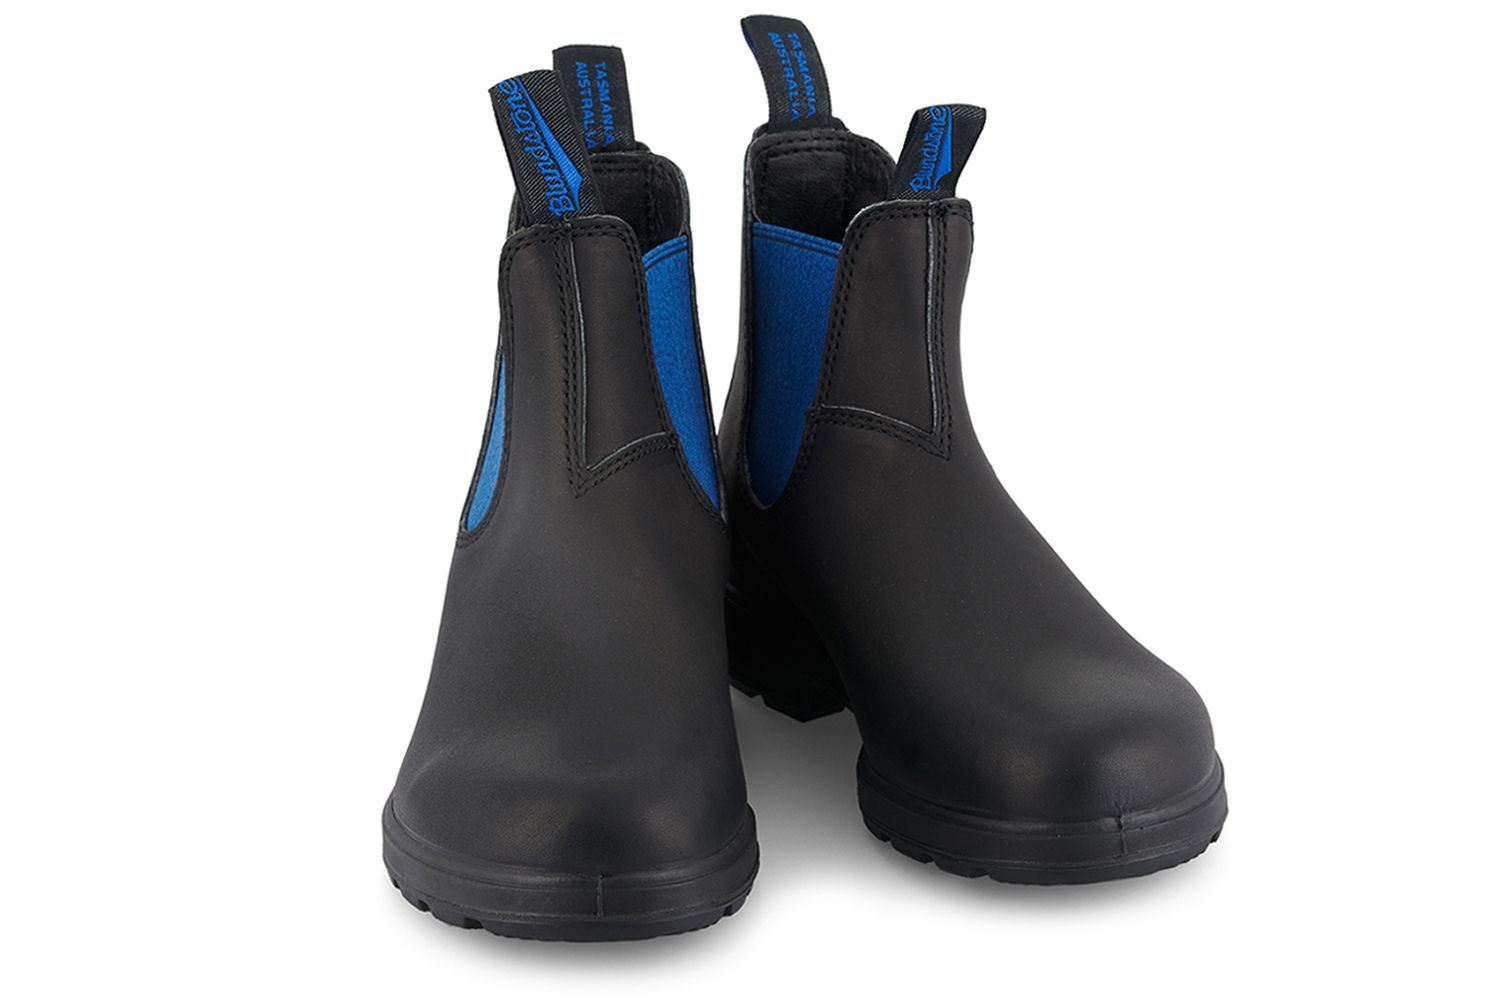 Blundstone 515 Black Blue Leather Chelsea Boots